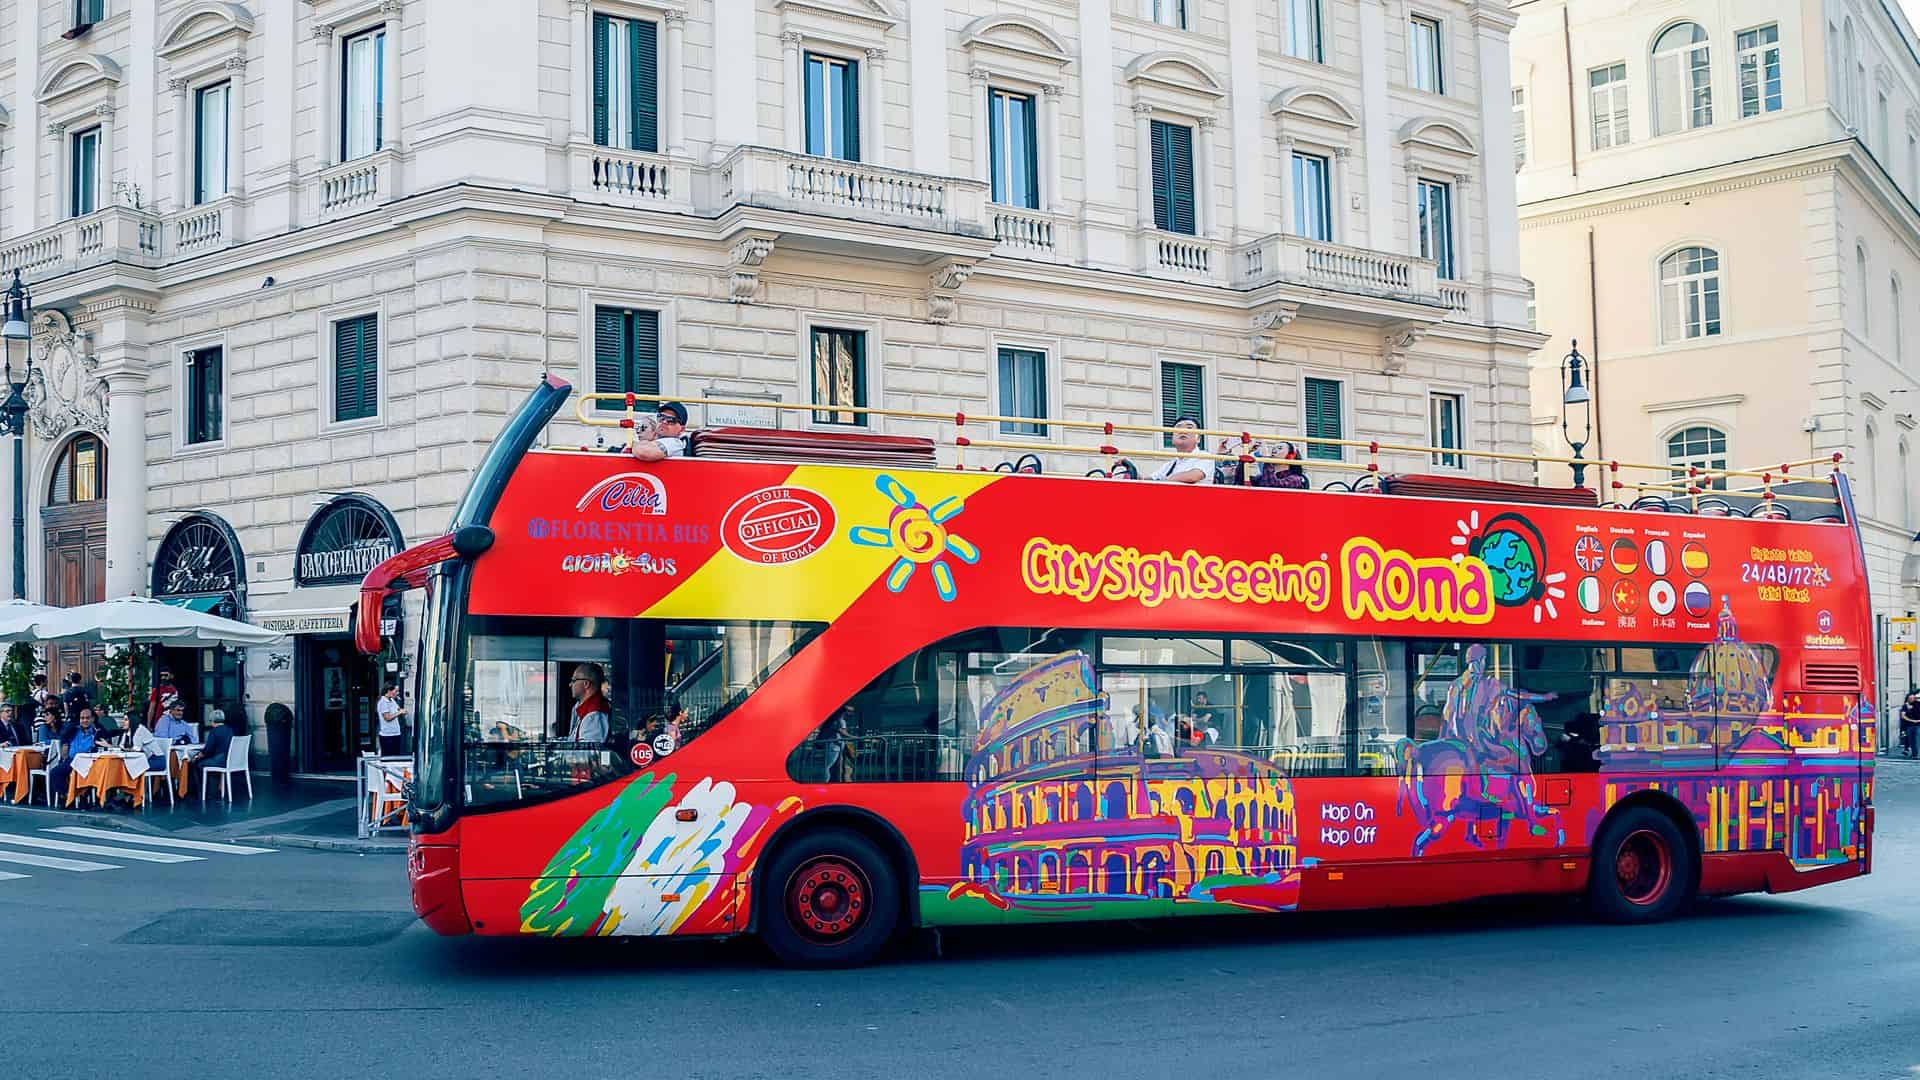 A red double-decker hop-on hop-off bus in Rome